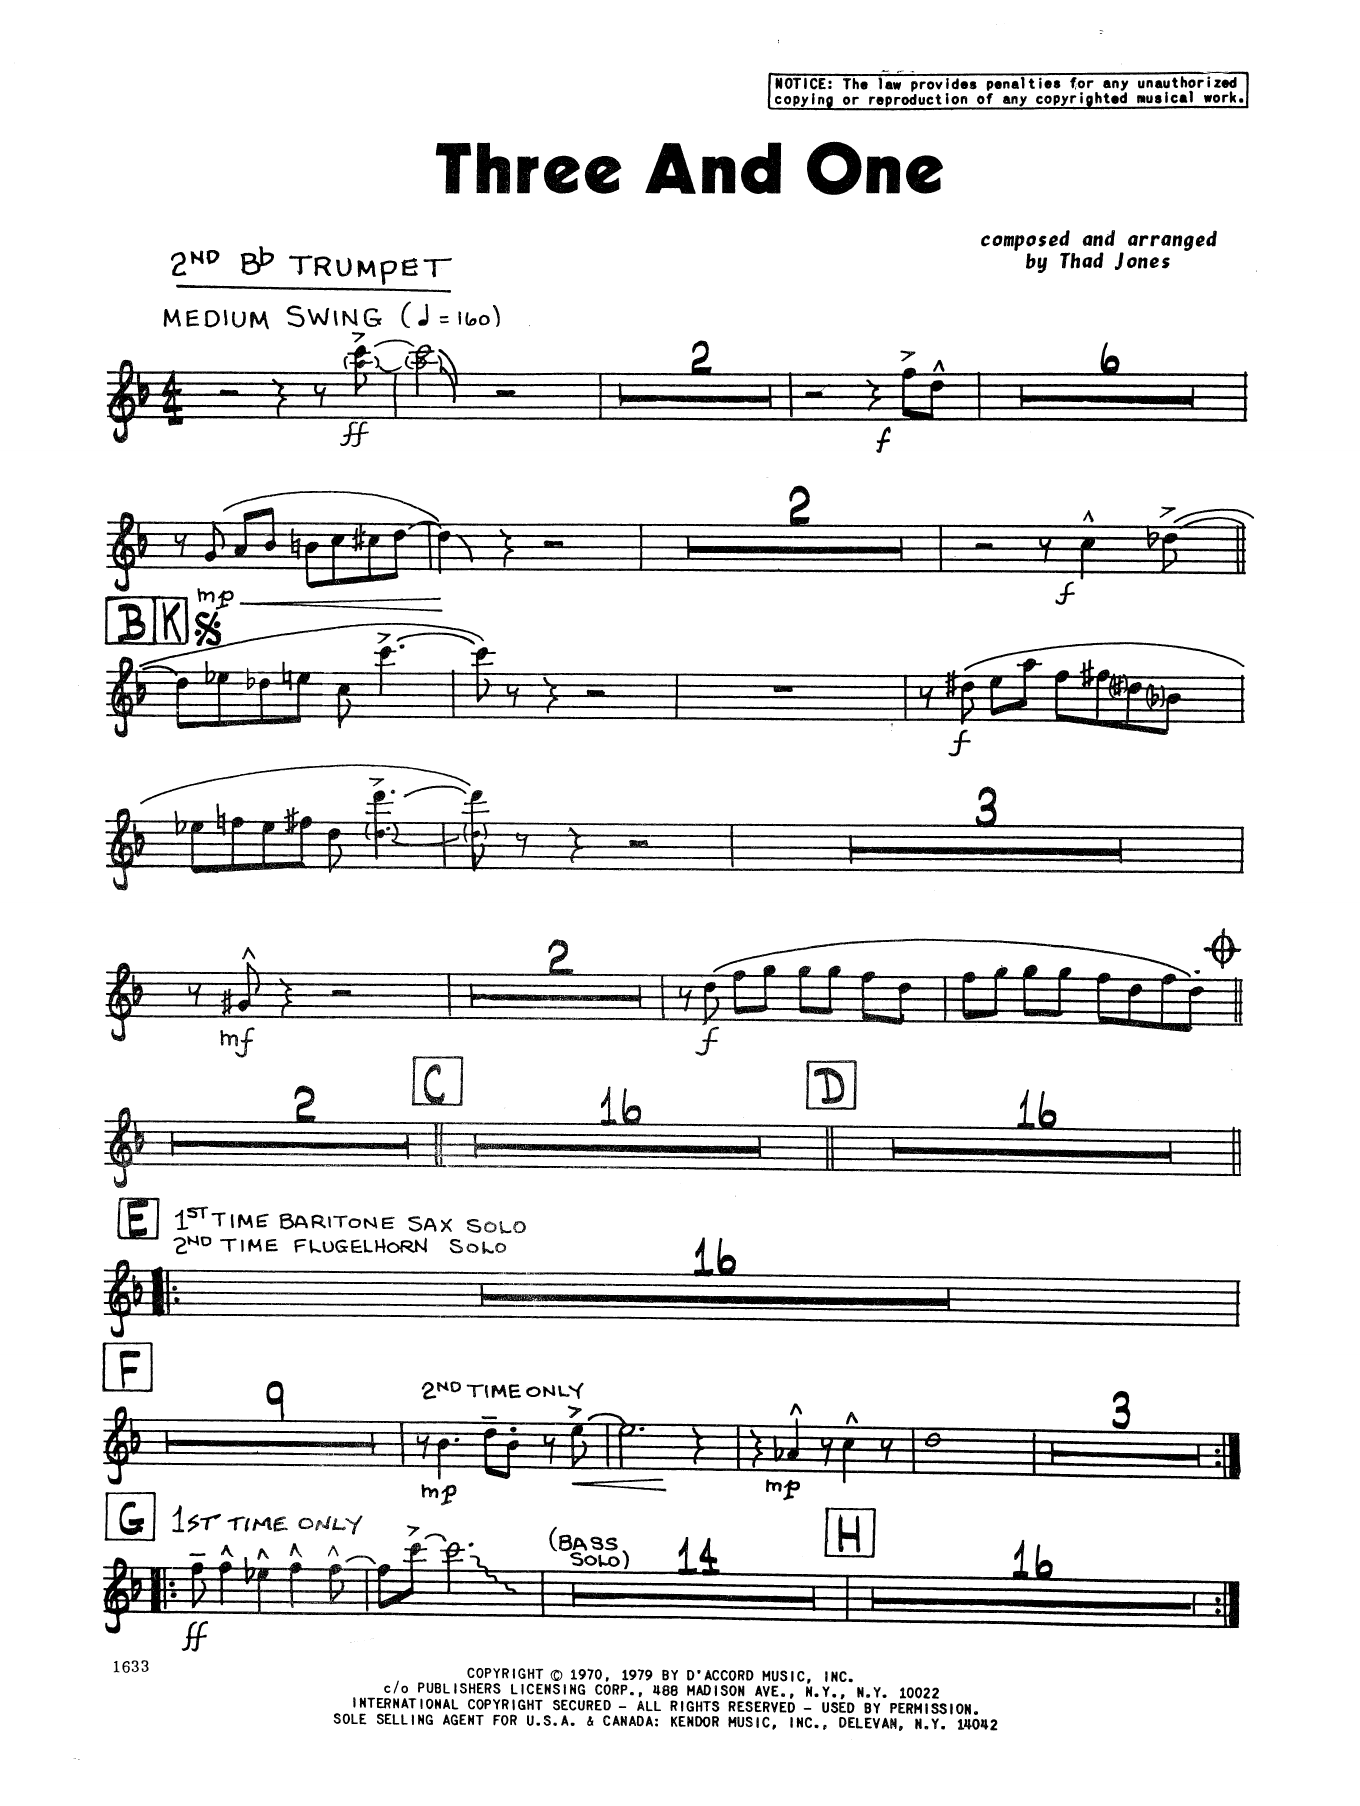 Download Thad Jones Three And One - 2nd Bb Trumpet Sheet Music